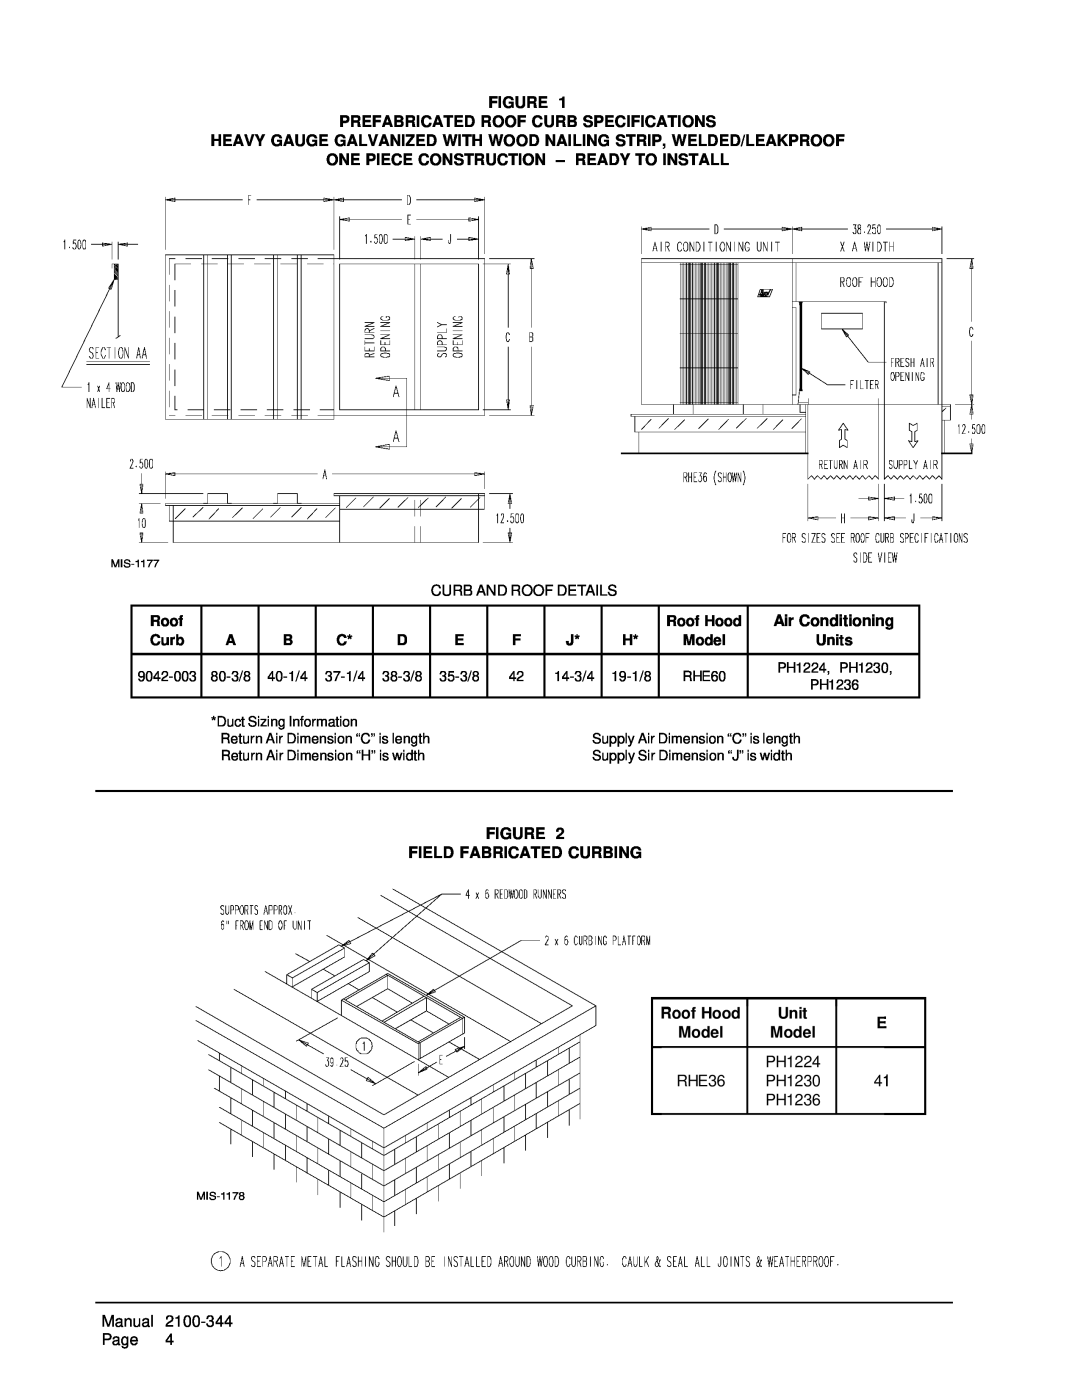 Bard PH1230, PH1236, PH1224 installation instructions Figure Prefabricated Roof Curb Specifications 